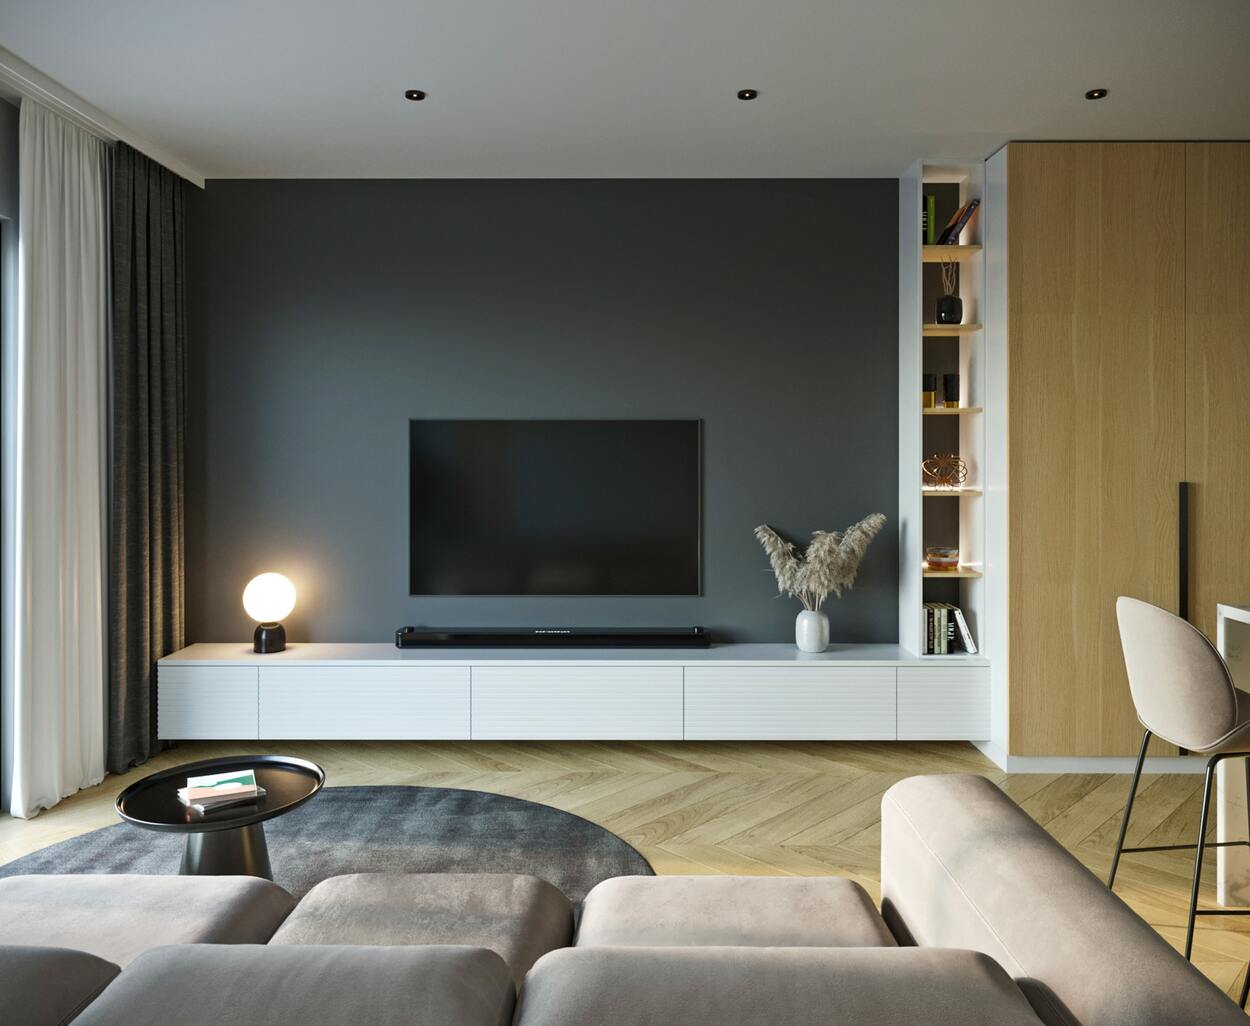 A flat smart screen TV mounted on a wall of an aesthetic room. 